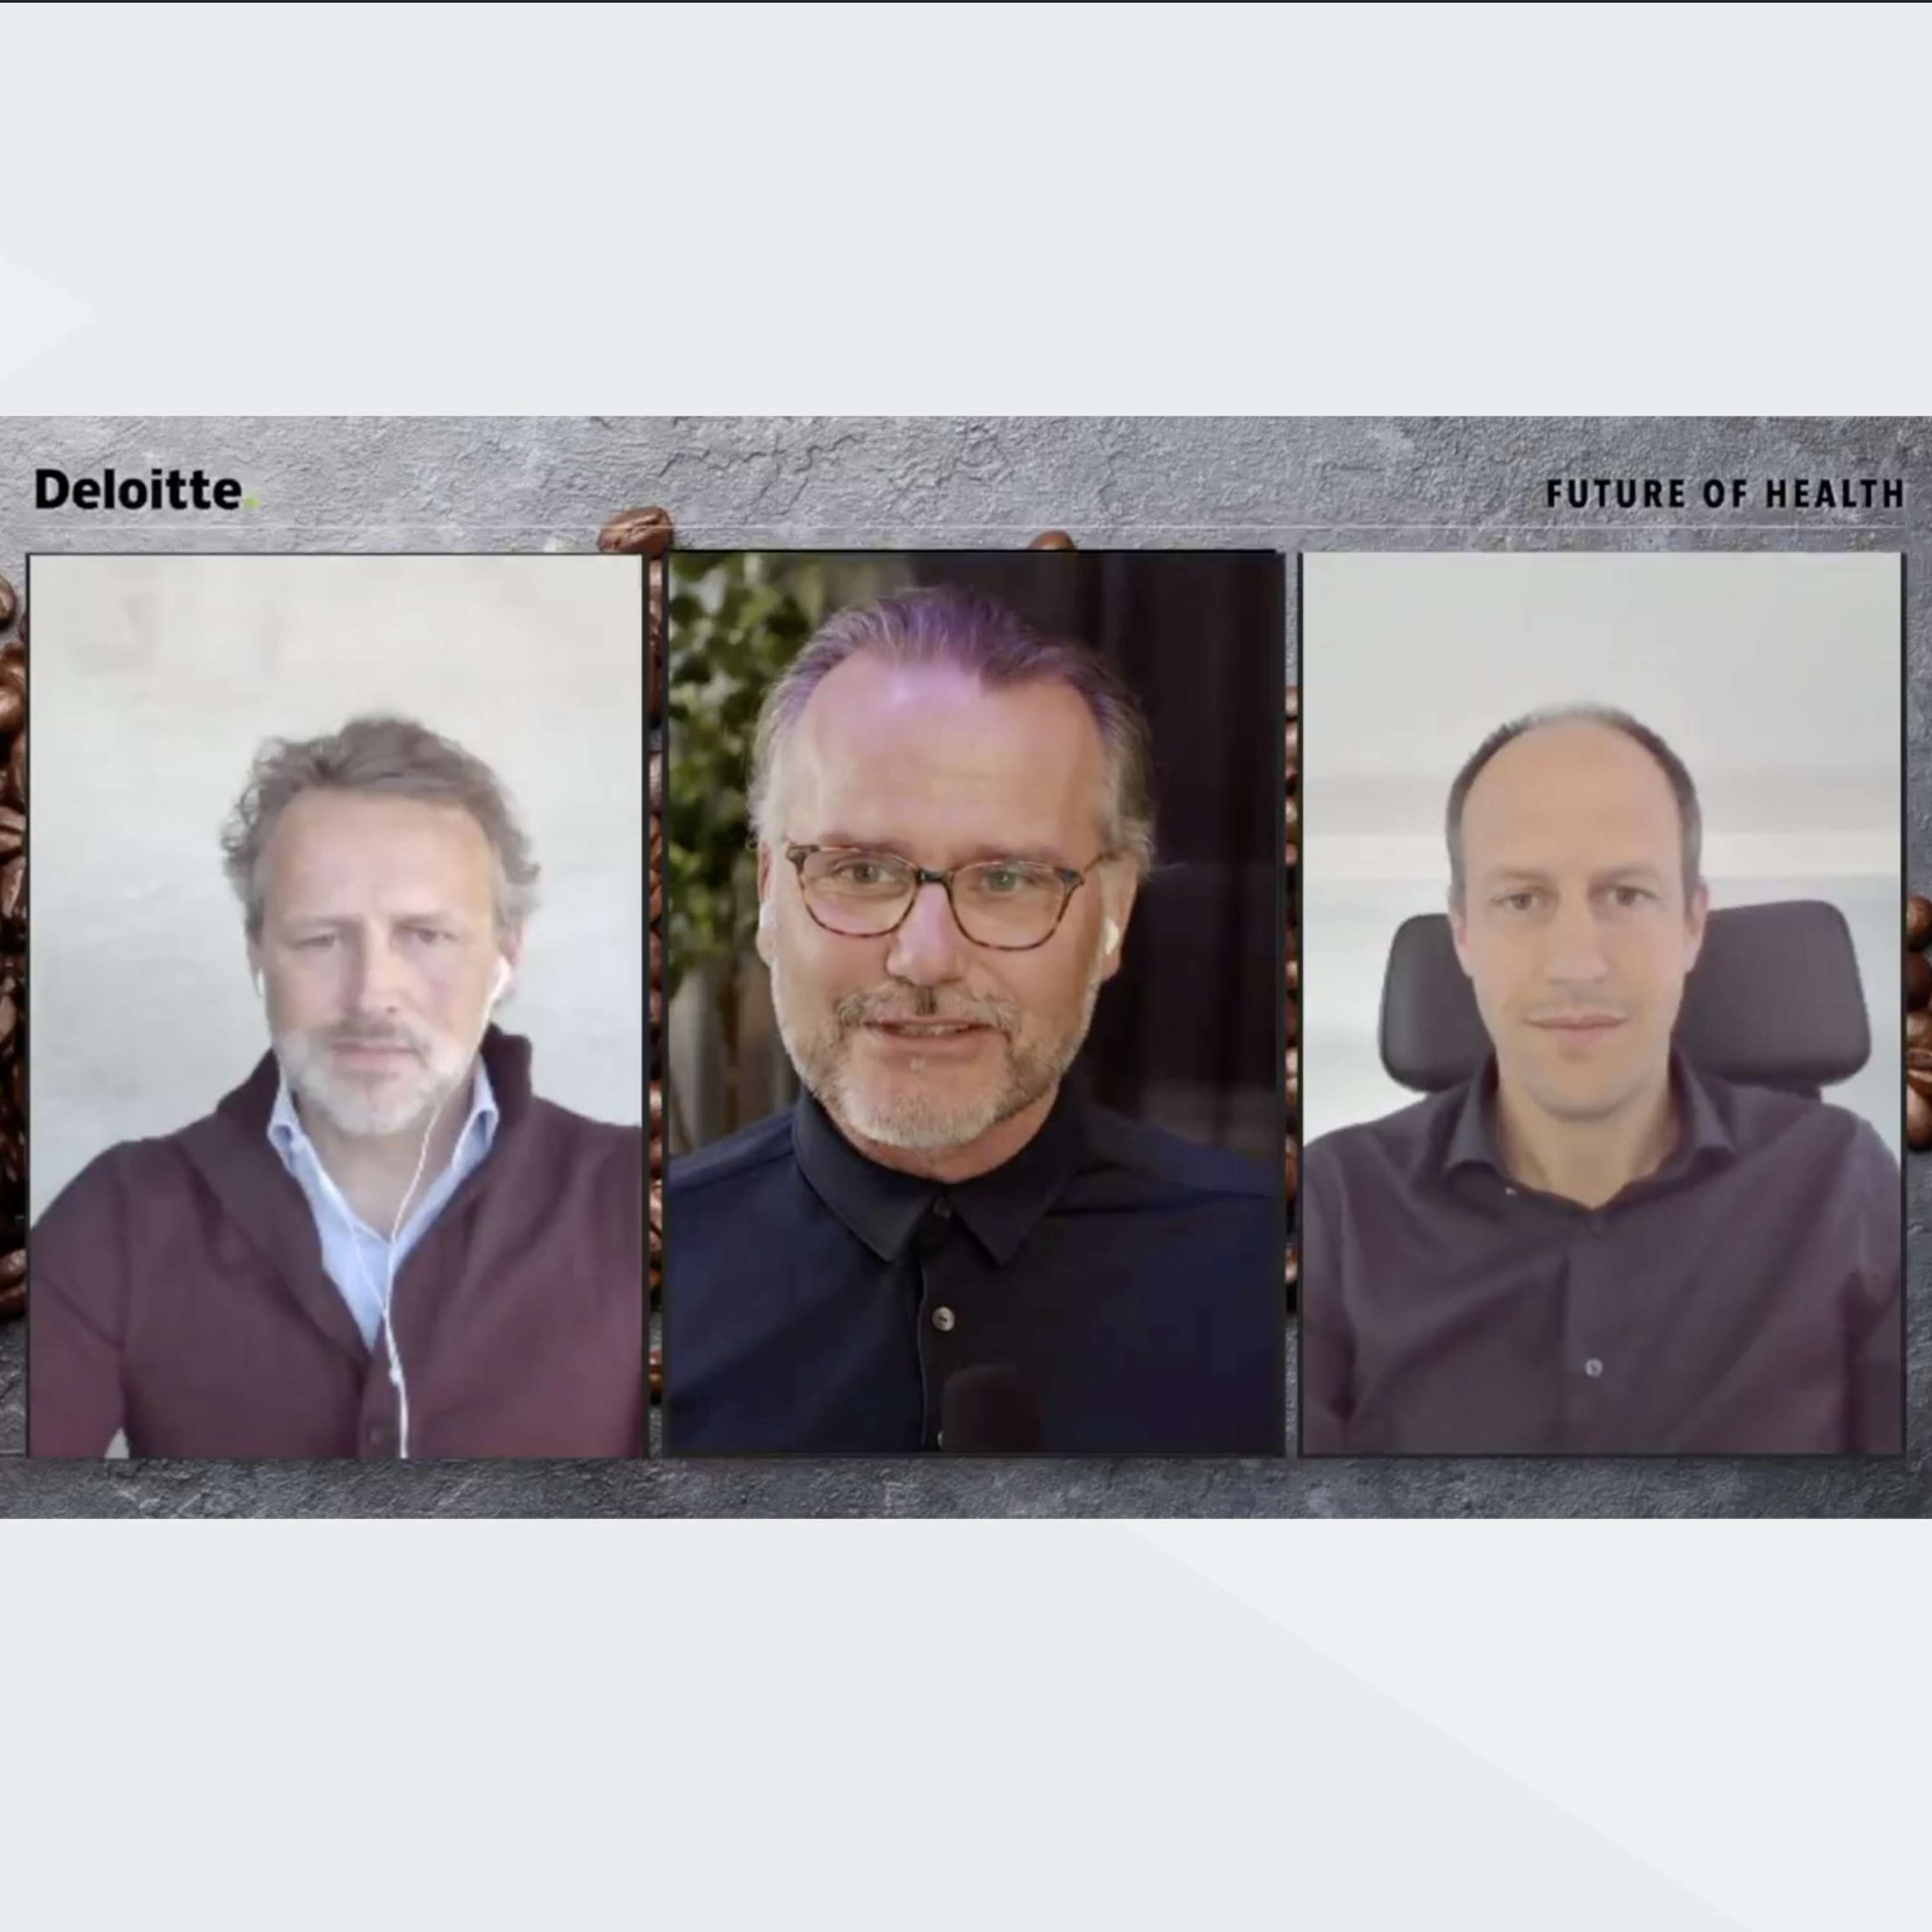 #VirtualCoffee with Dominique van Seggelen and Randy Jagt on the Future of Food.